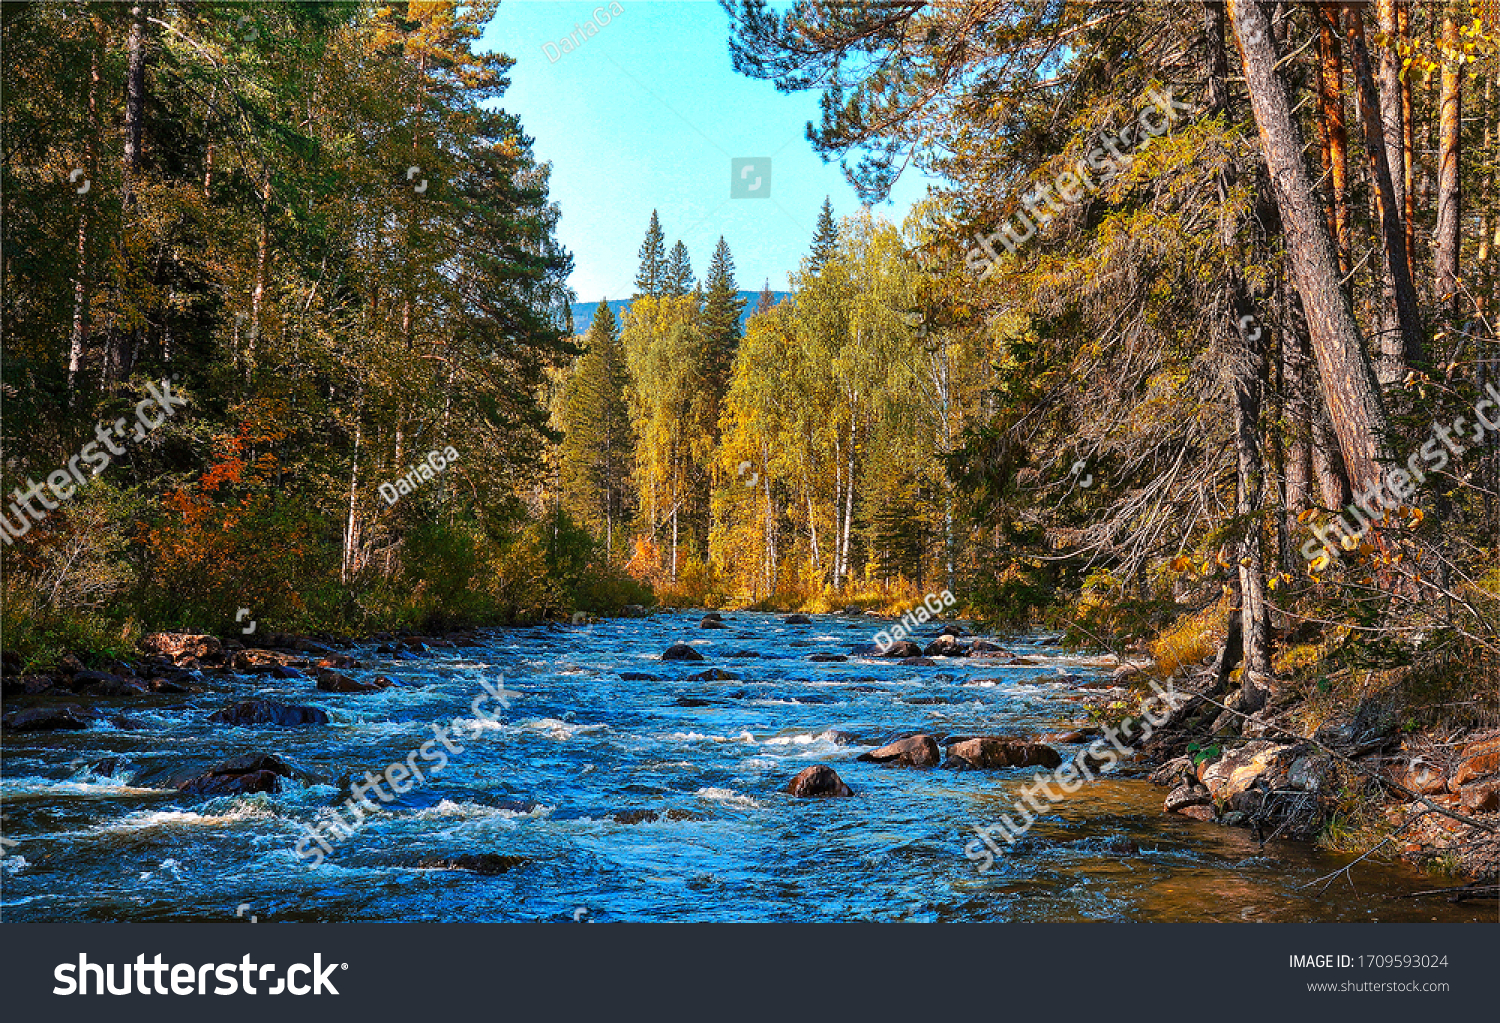 Forest trees by river water landscape #1709593024